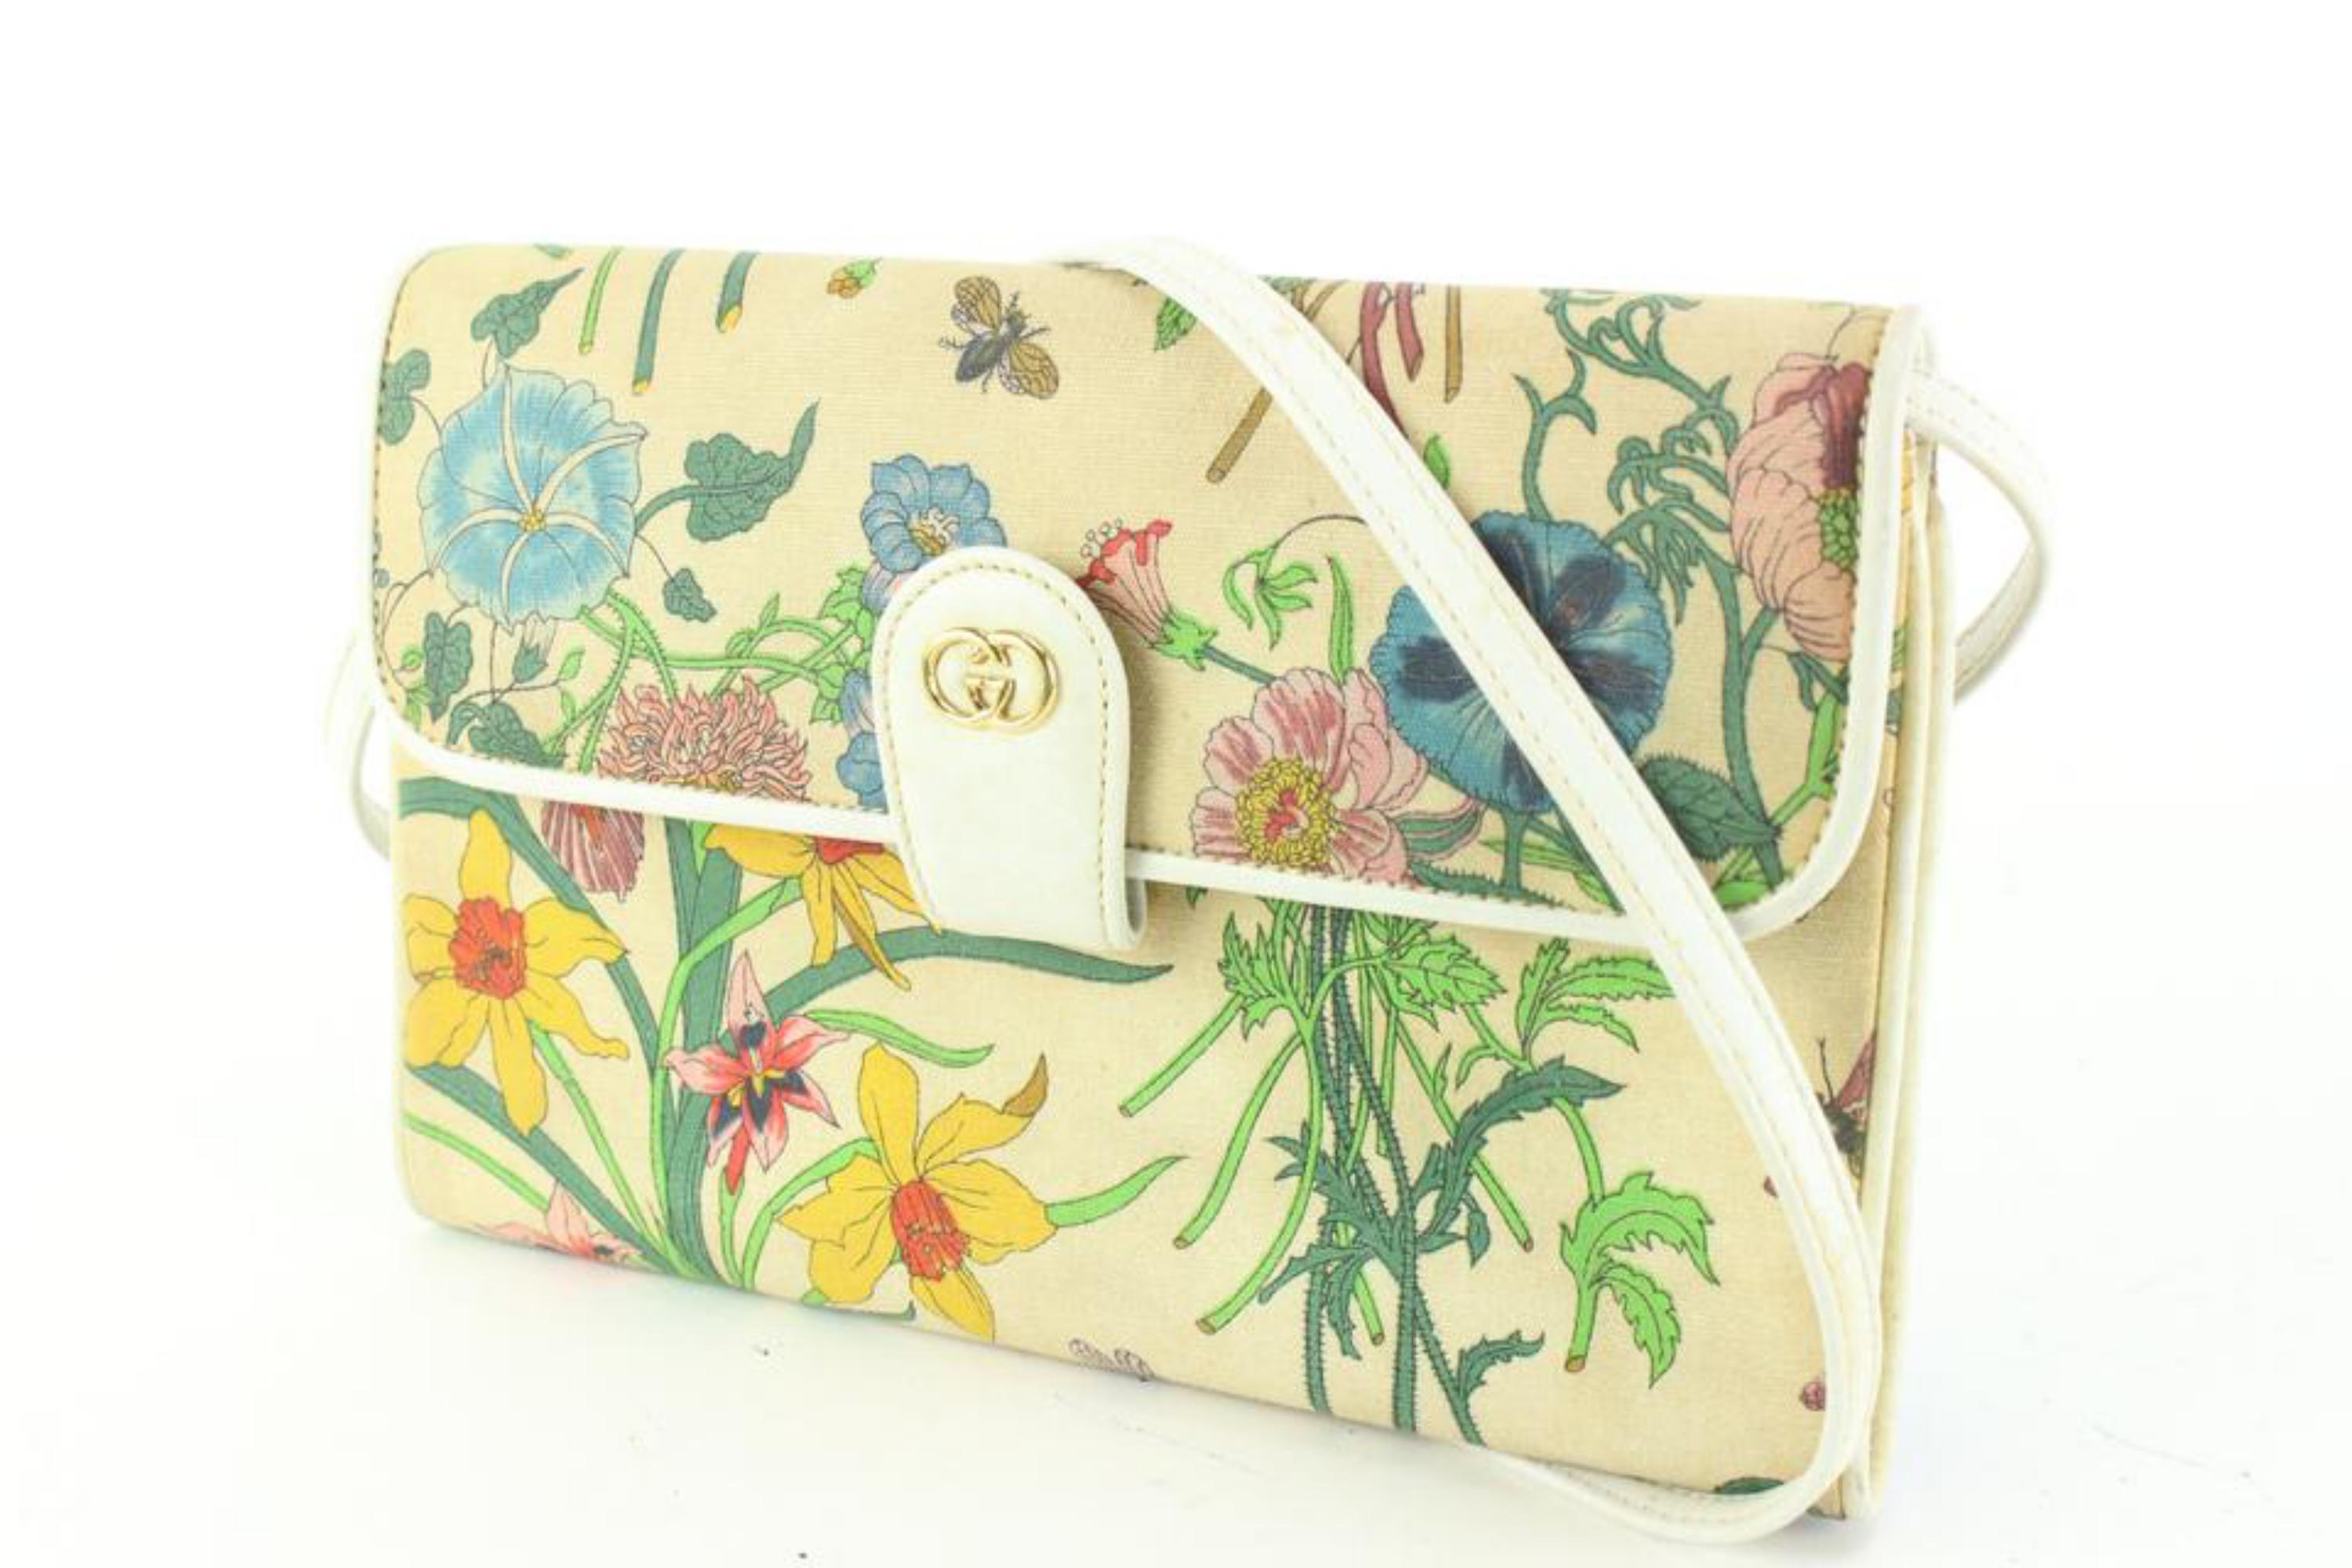 Gucci Floral Blooms Crossbody Tote Bag 44g428s 4